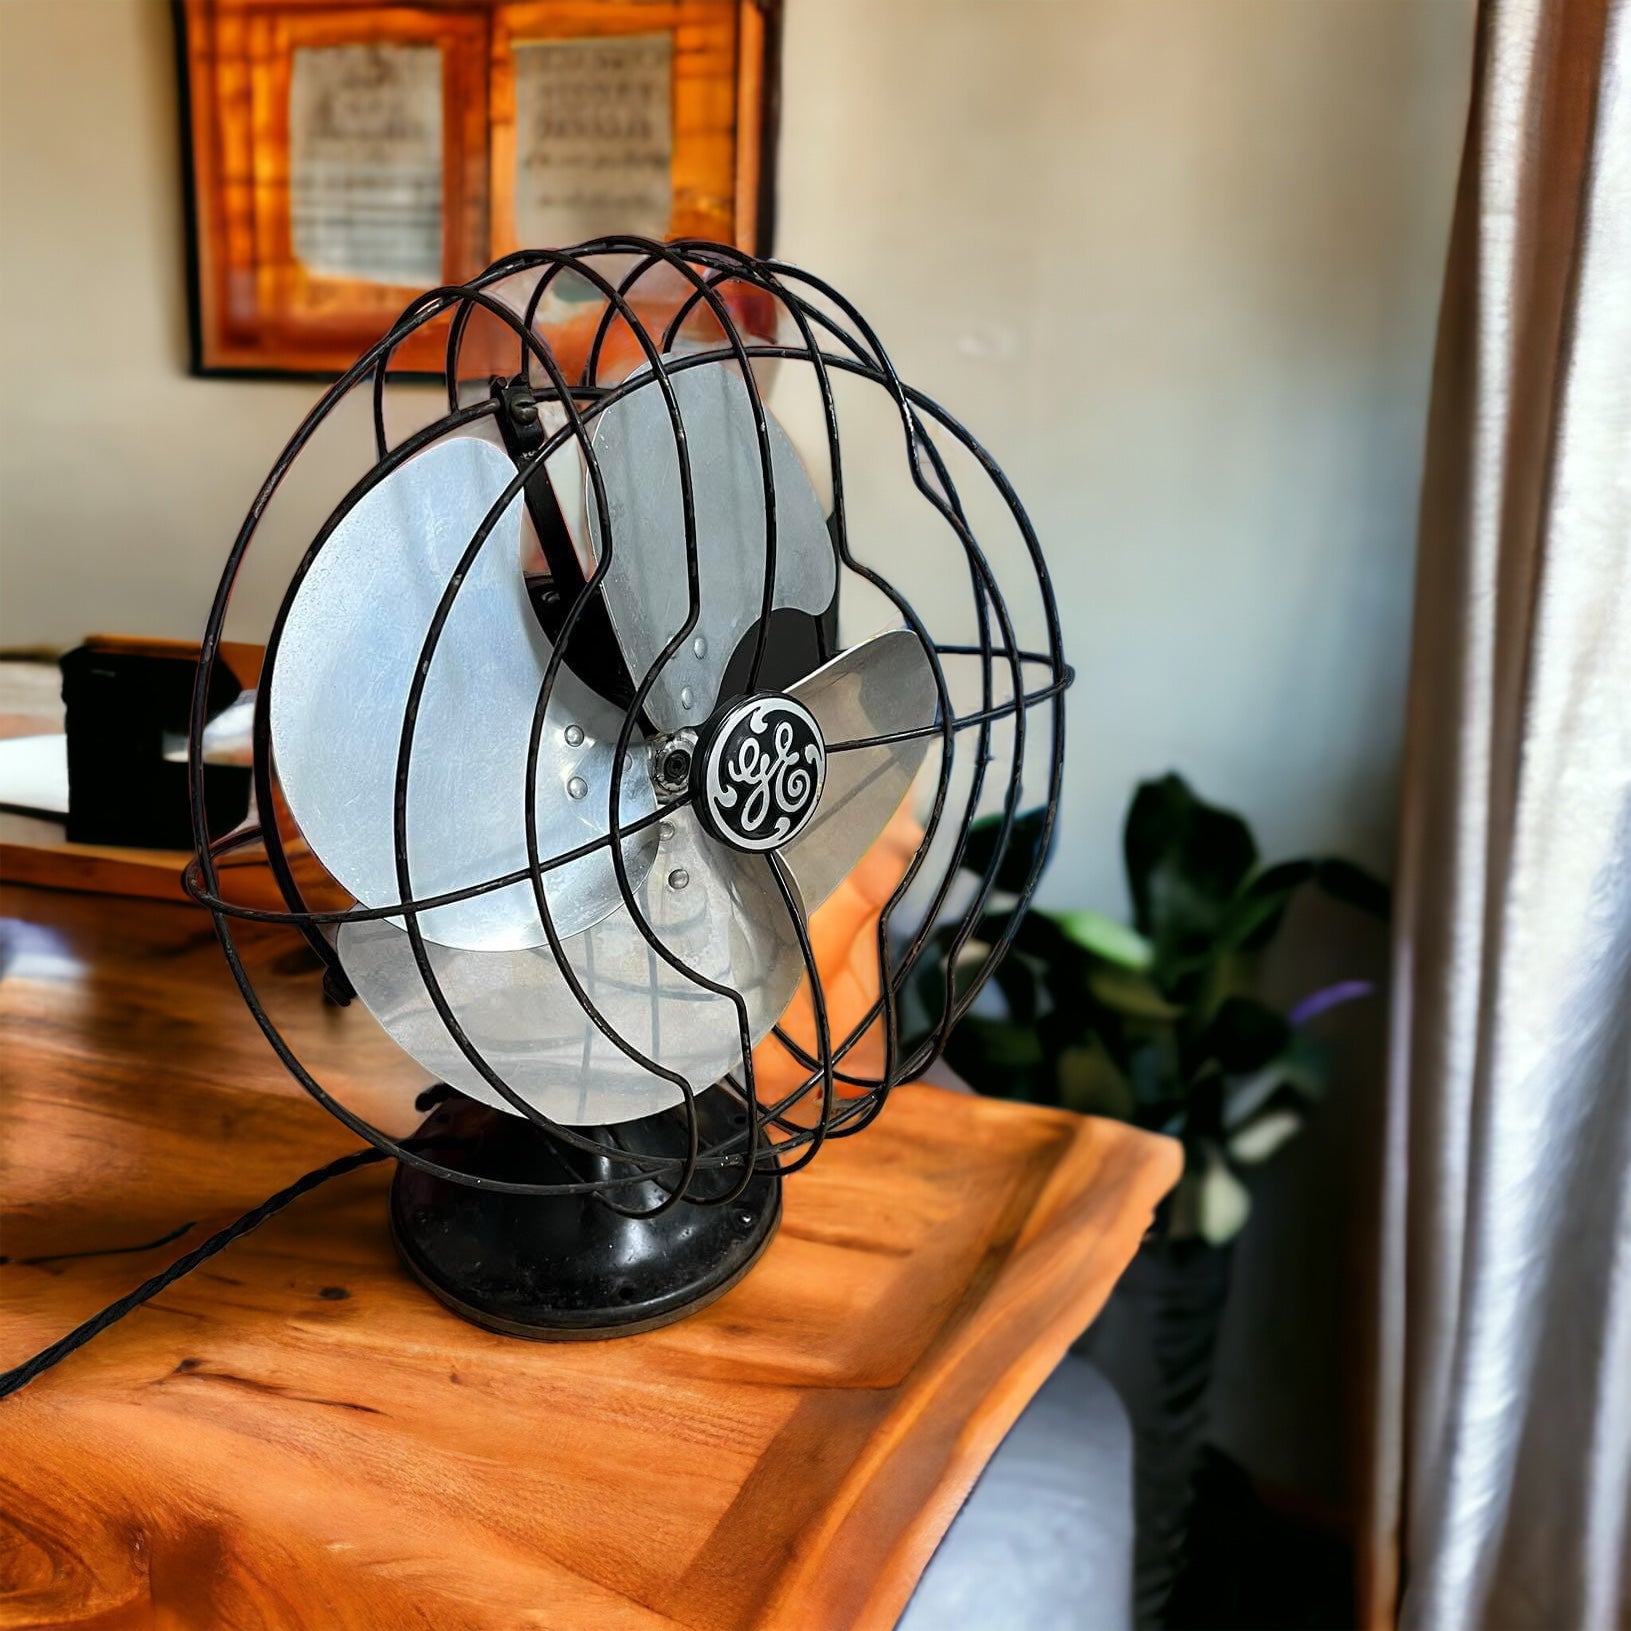 Vintage GE Desk Fan - Rewired With New Braided Cloth Wire/Vintage Style Plug